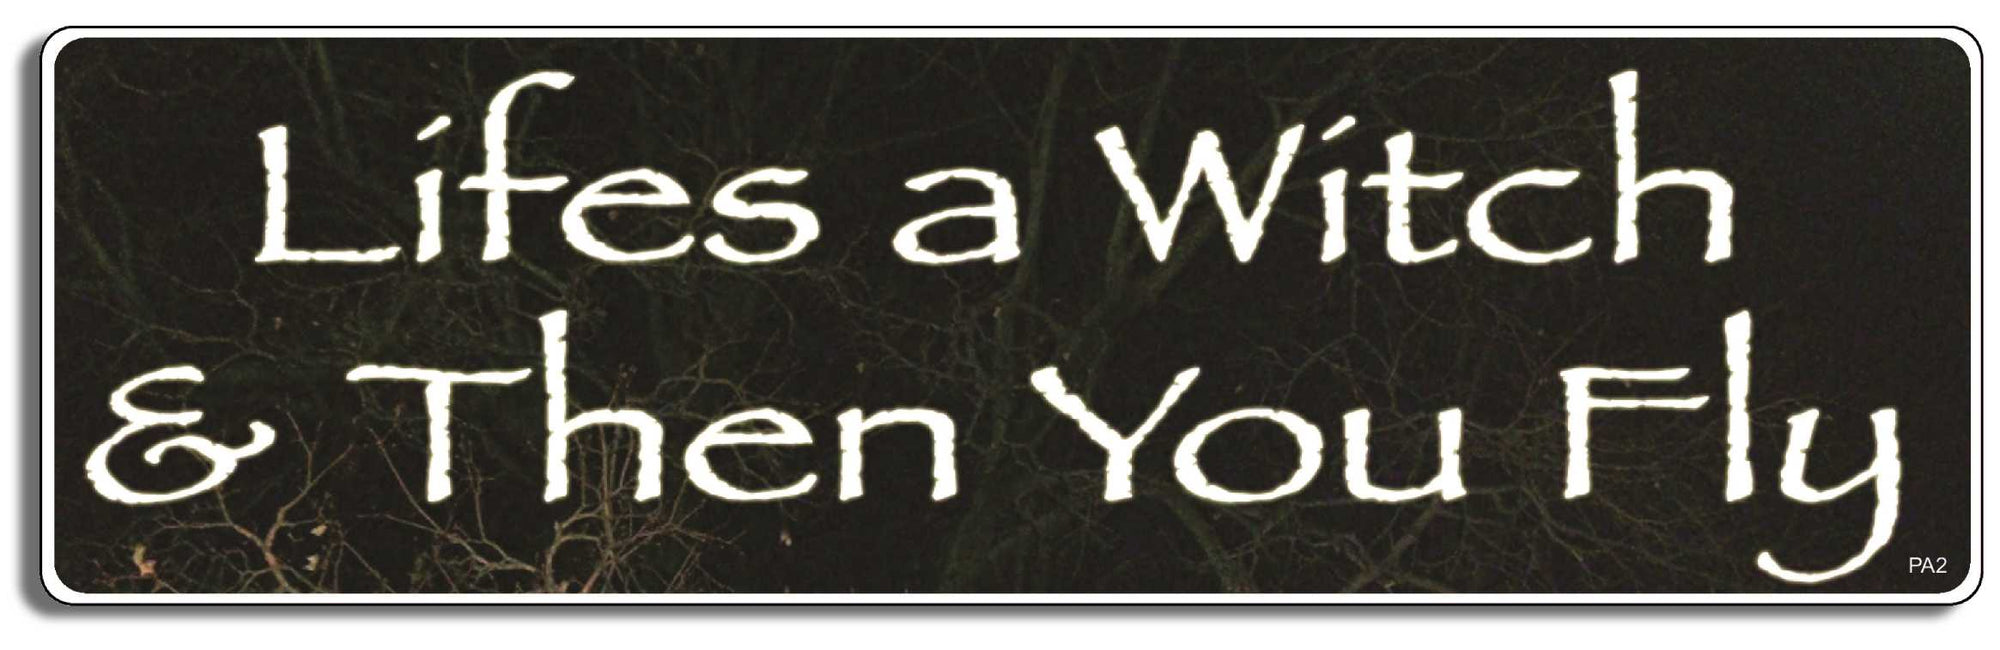 Lifes a witch. and then you fly - 3" x 10" Bumper Sticker--Car Magnet- -  Decal Bumper Sticker-pagan Bumper Sticker Car Magnet Lifes a witch. and then you fly-  Decal for carsatheist, pagan, wiccan, witch